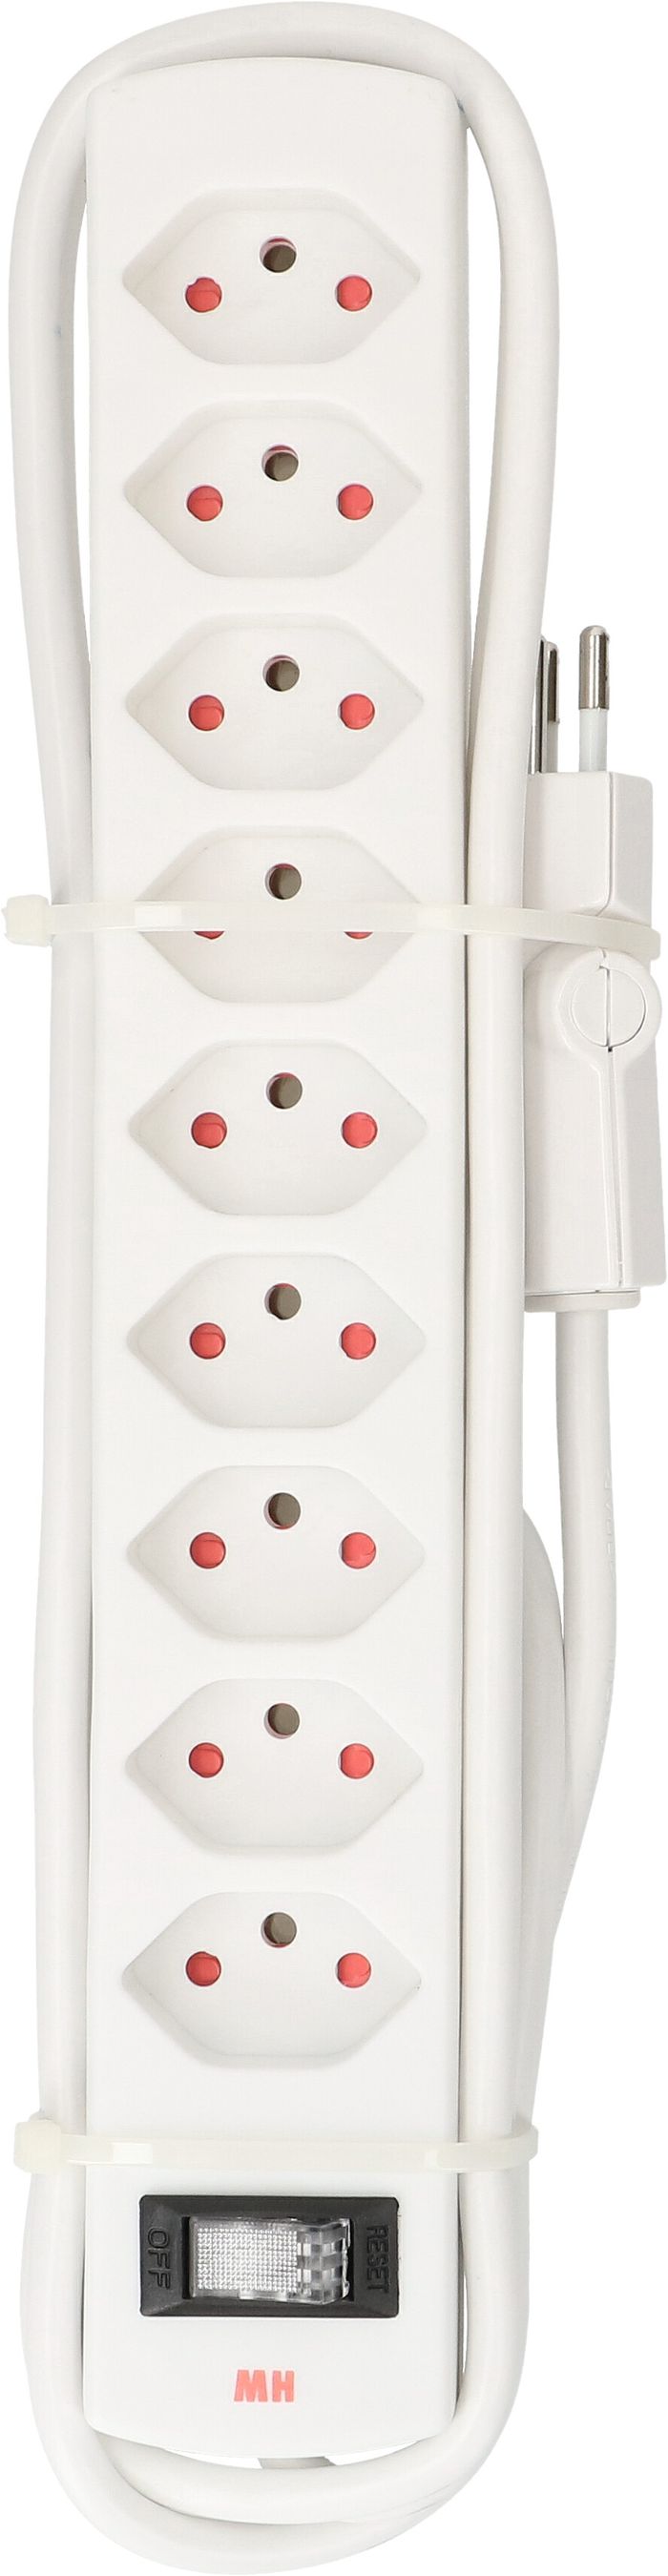 Multiple sockets Safety Line 9xtype13